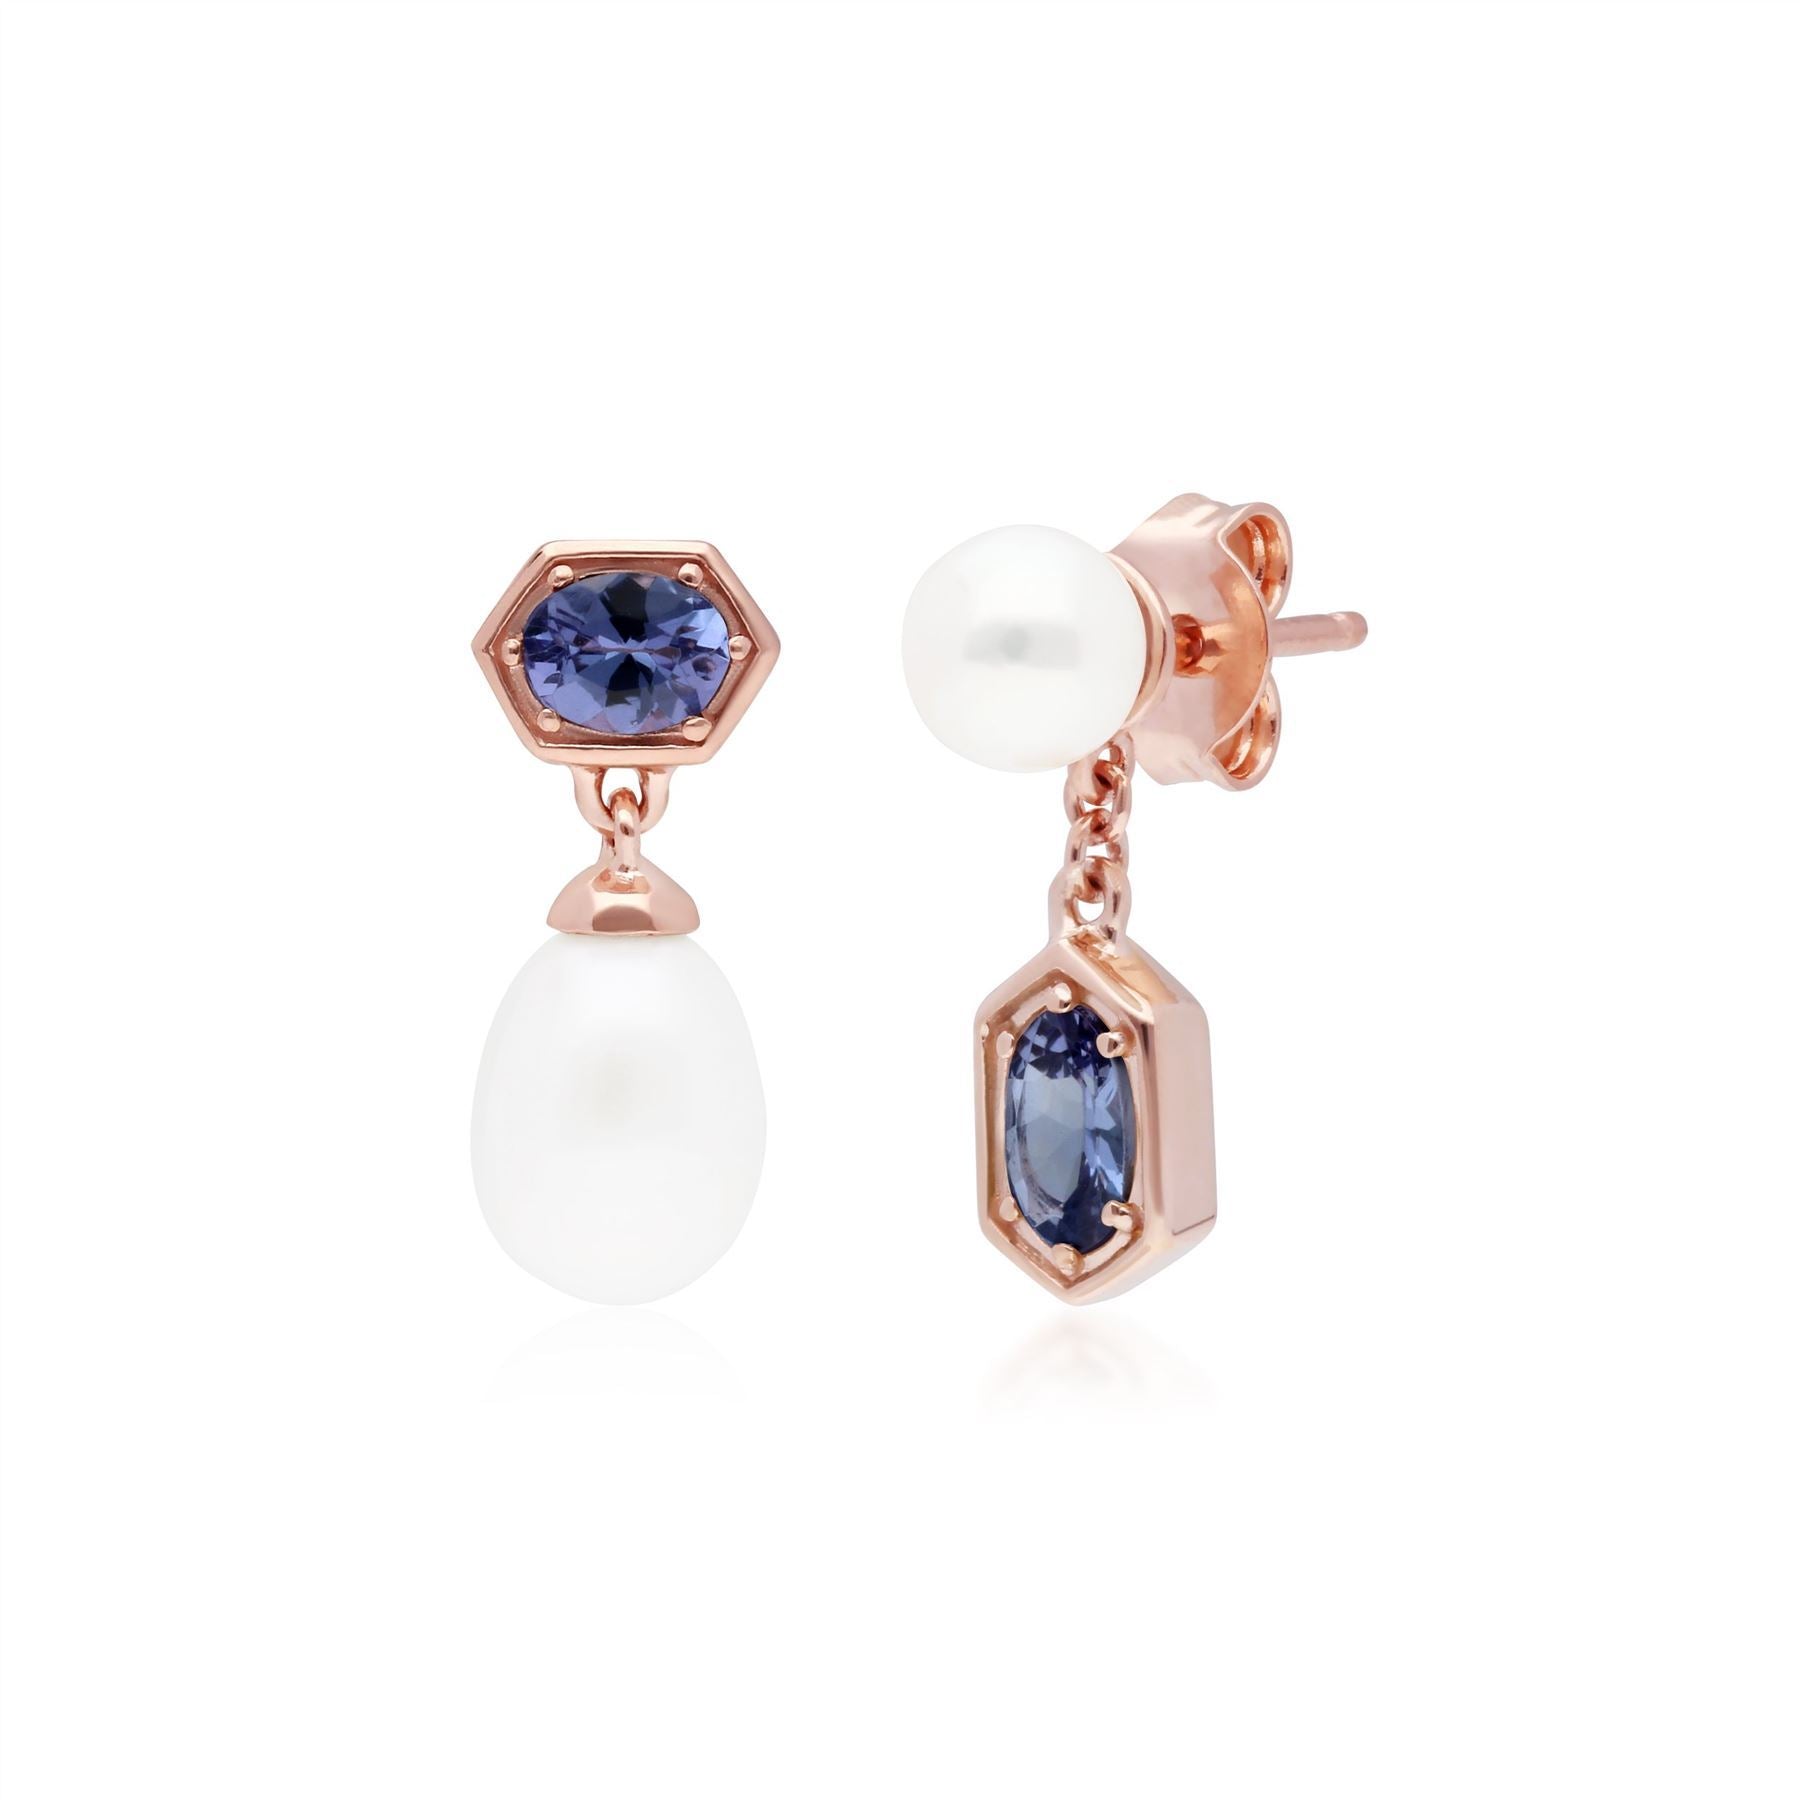 Modern Pearl & Tanzanite Mismatched Drop Earrings in Rose Gold Plated Sterling Silver